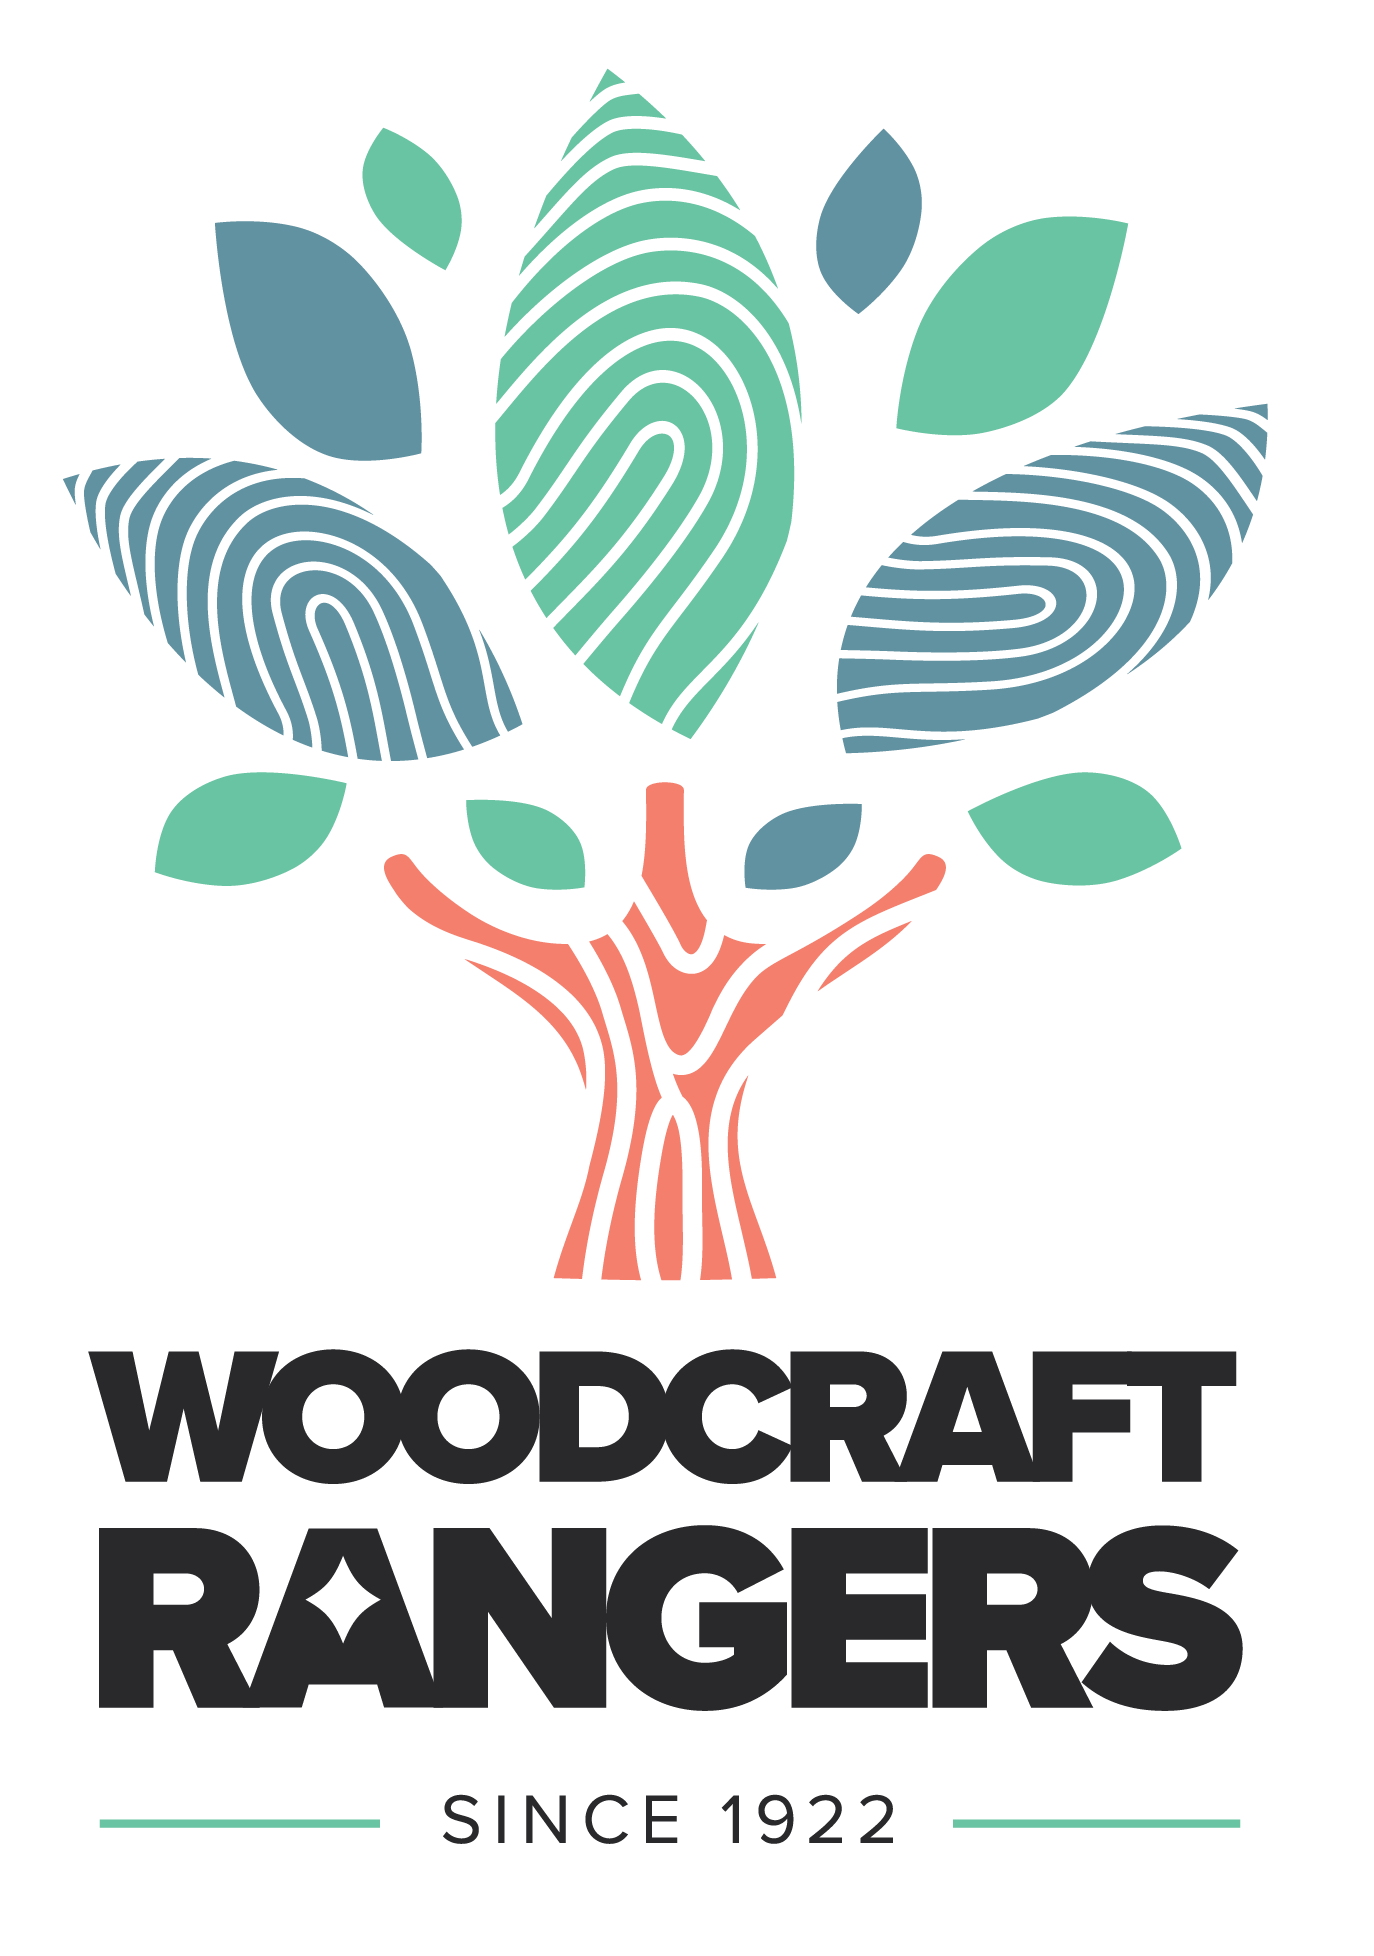 Woodcraft Rangers Logo - Full-color, stacked version